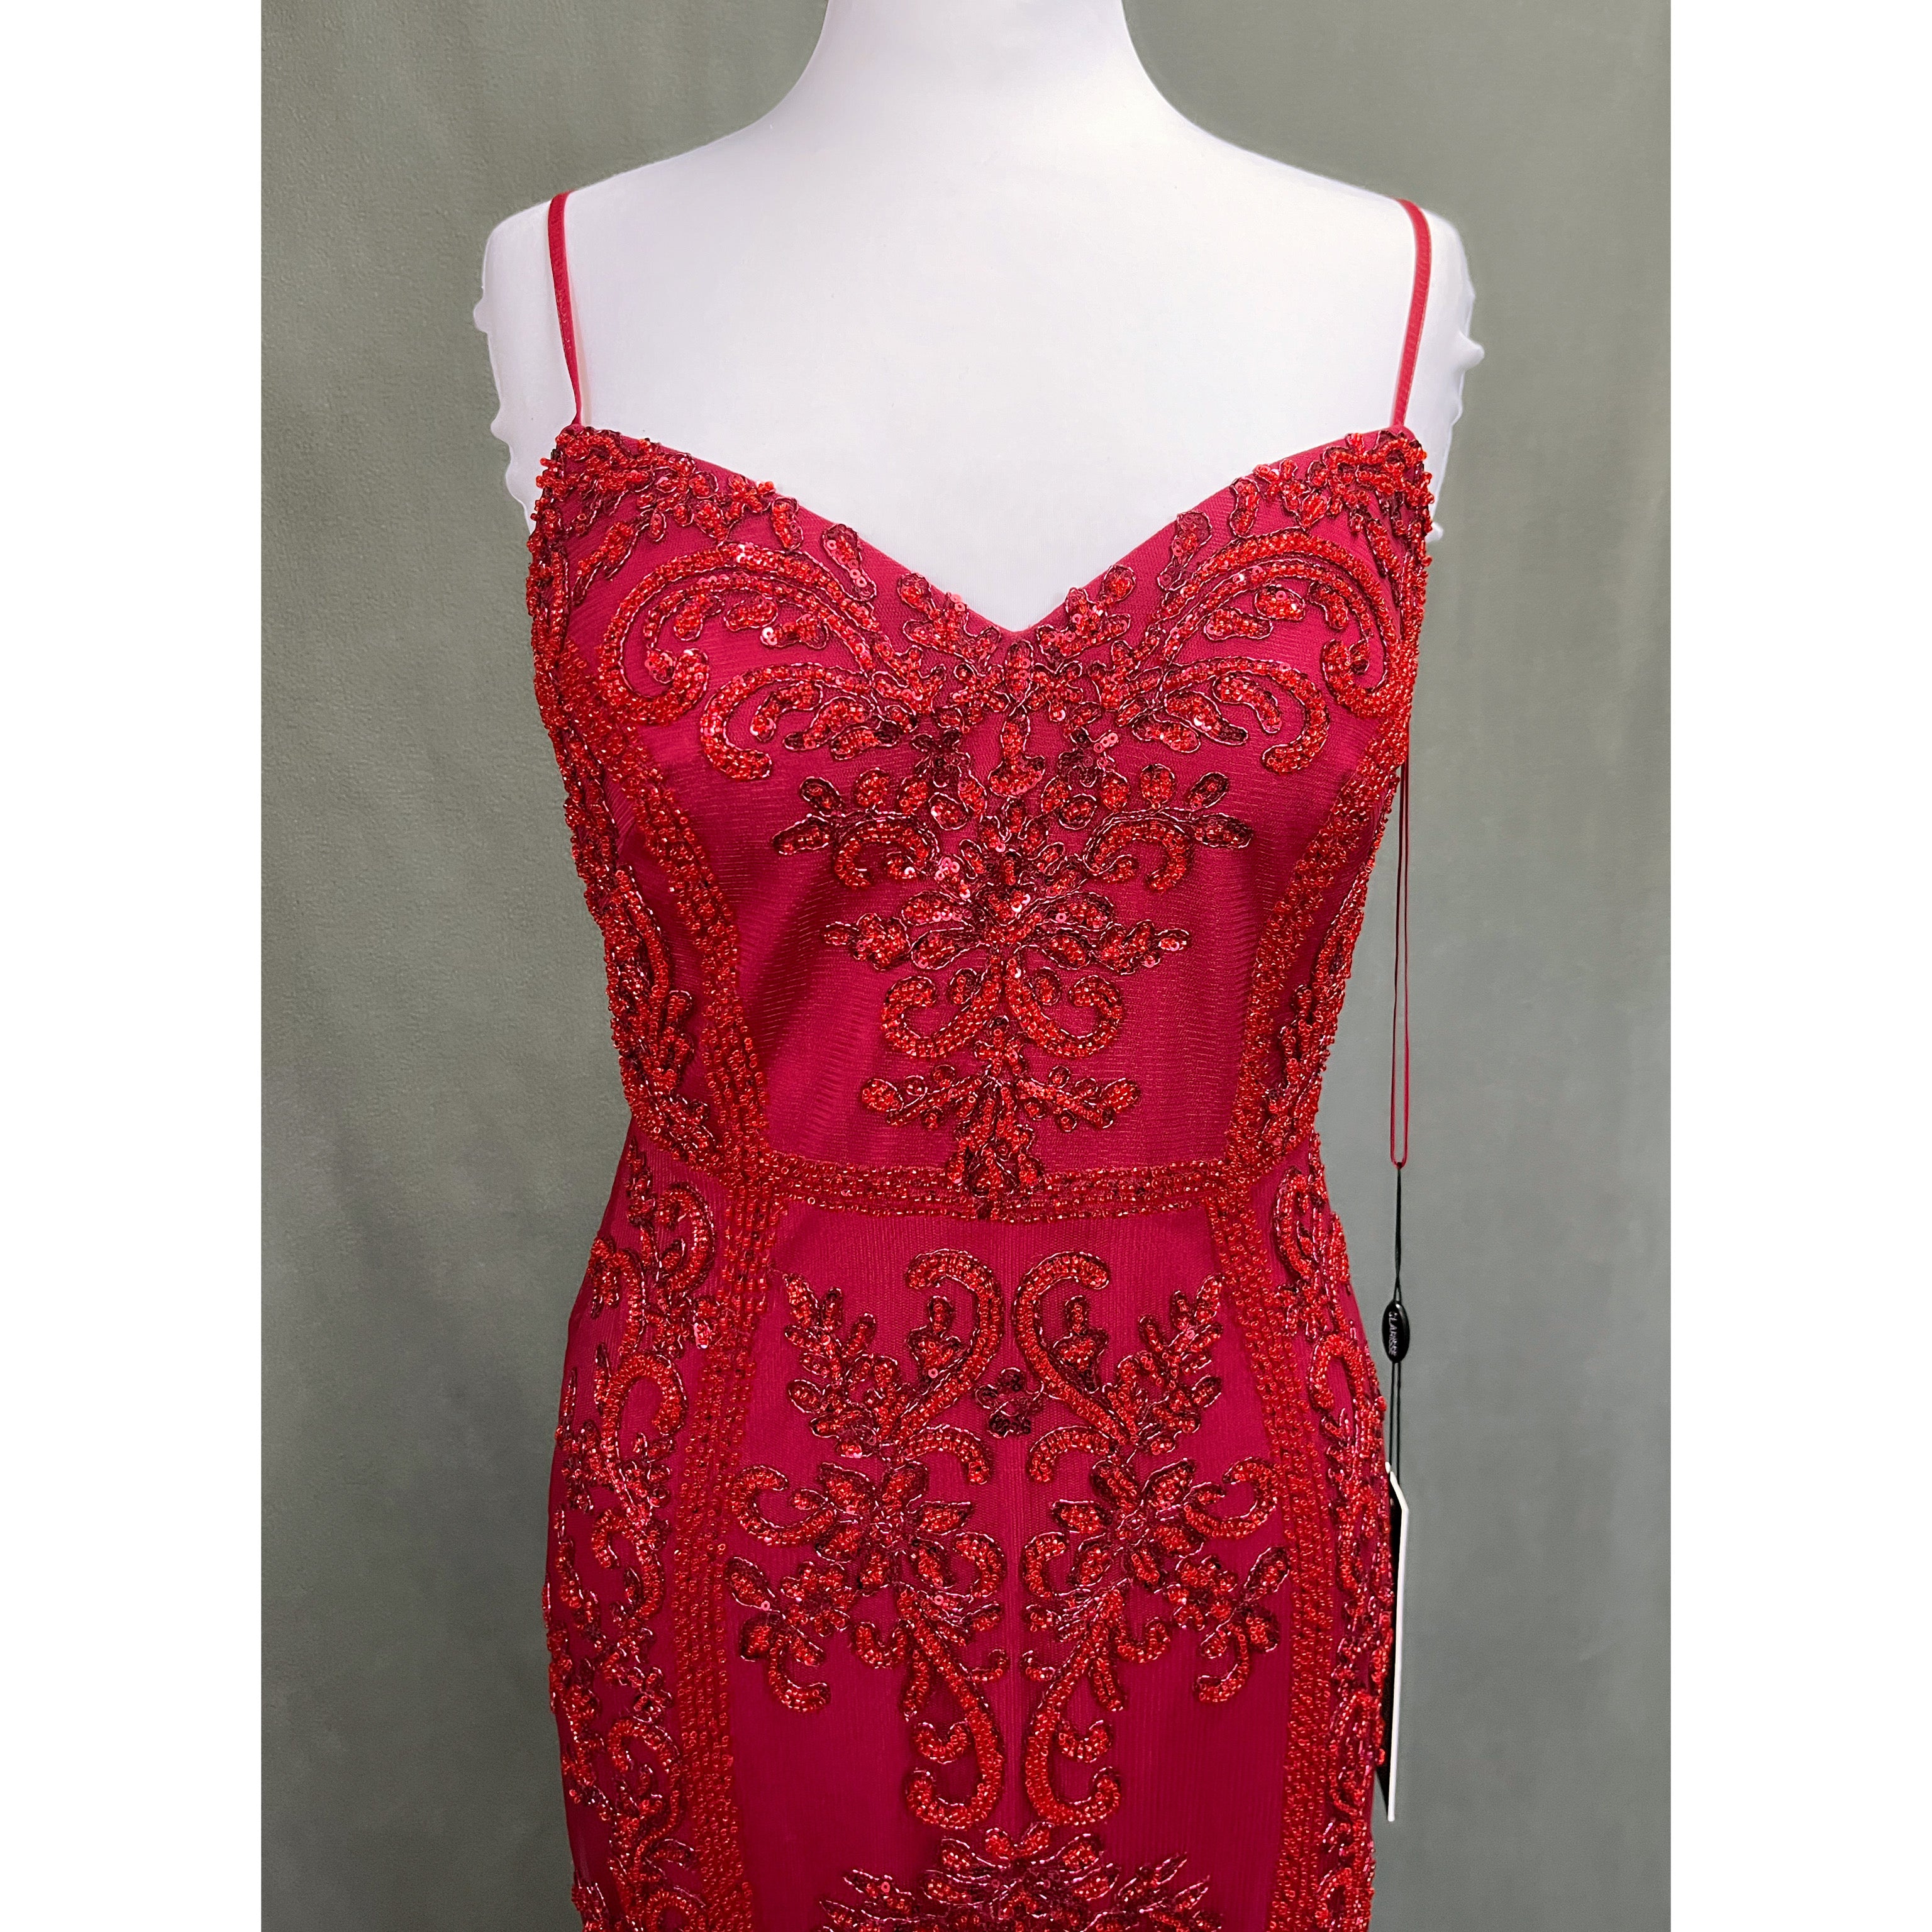 Clarisse brick red dress, size 4, NEW WITH TAGS!